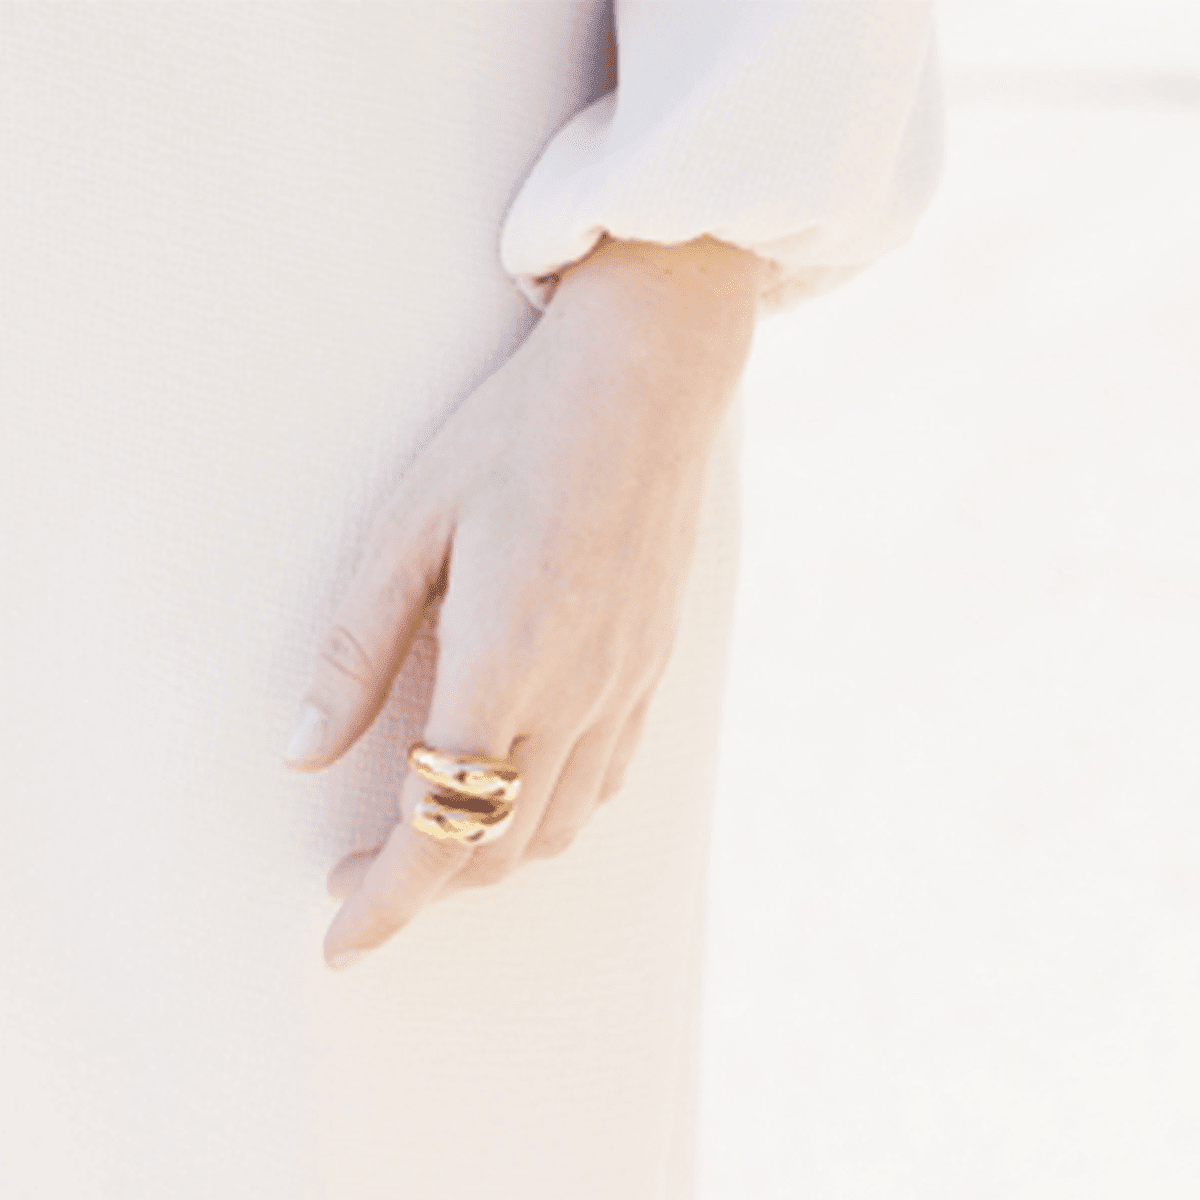 Model Wearing Handmade 18k Gold Plated Spiral Ring With Chic Formal Wear